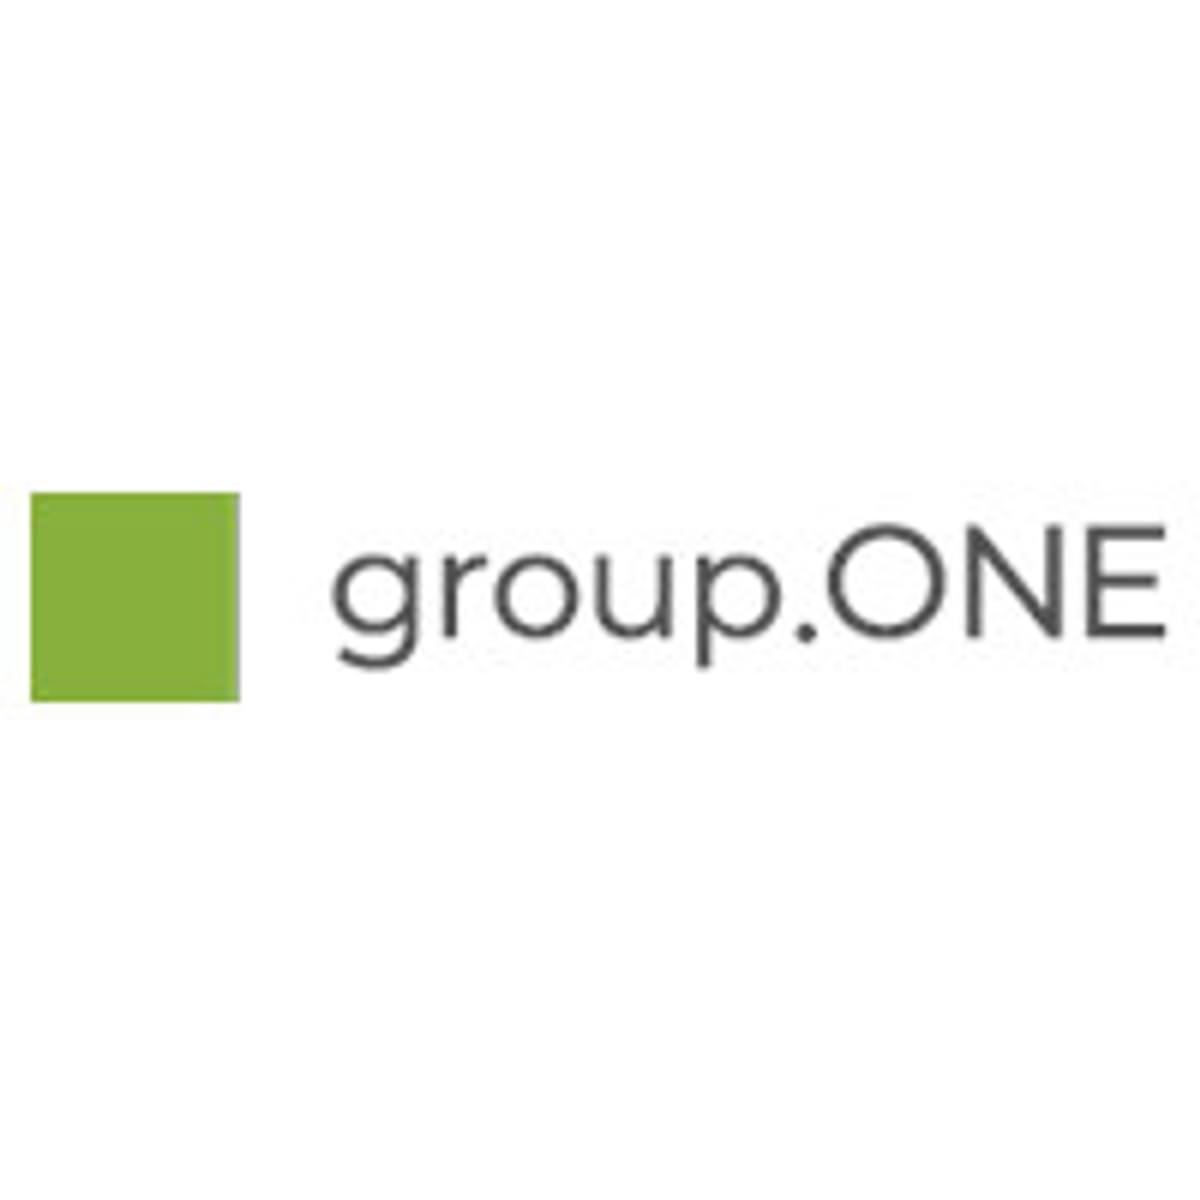 group.ONE neemt WP Media over image